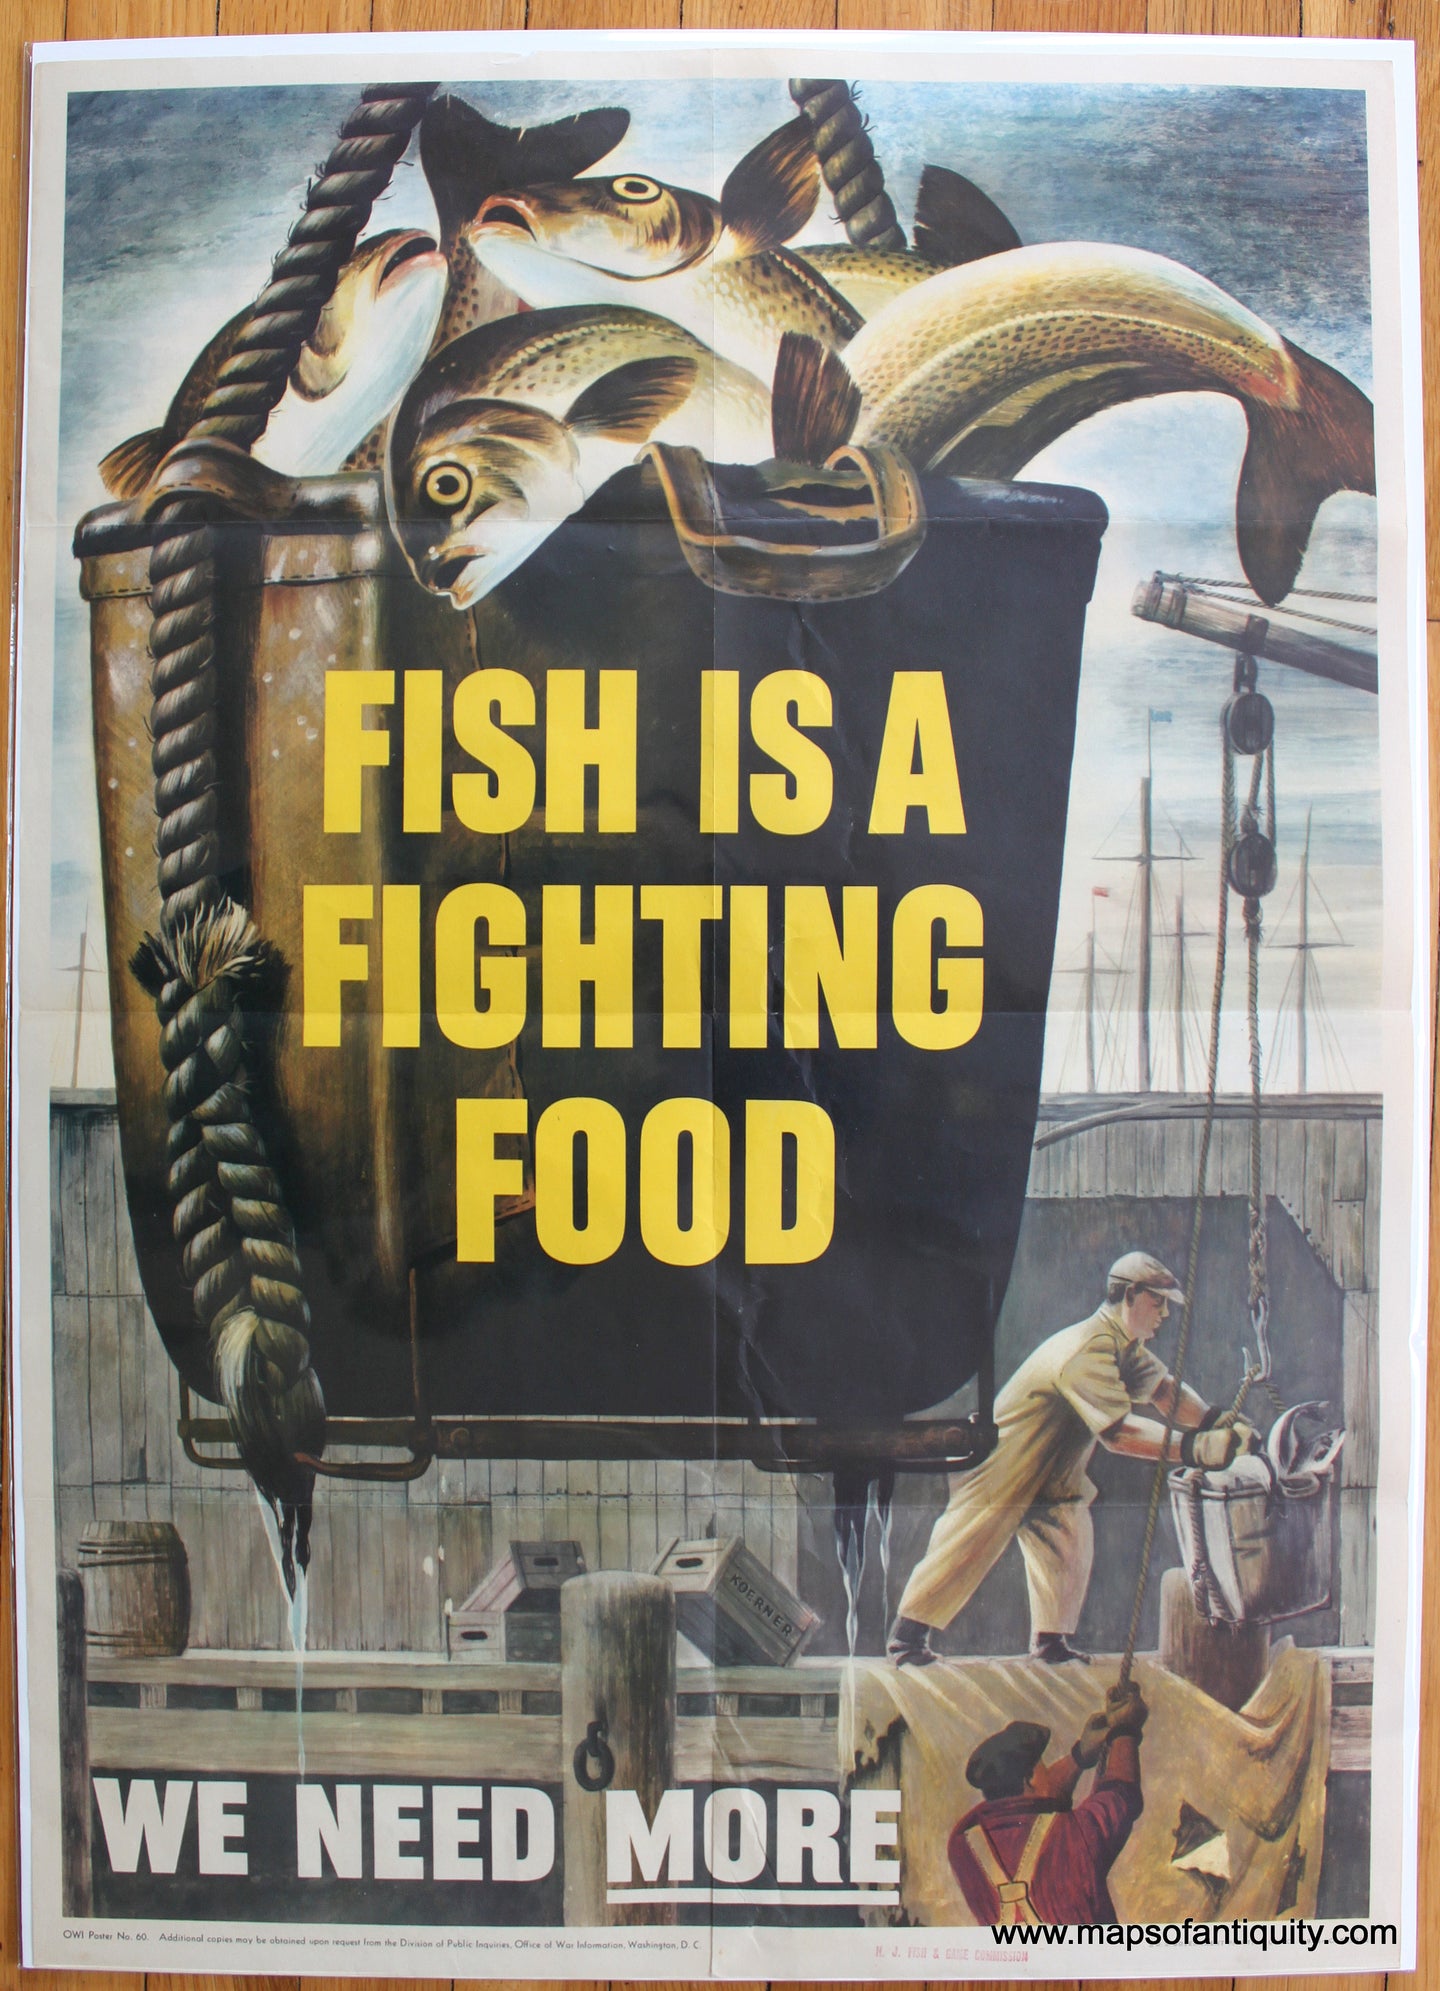 Antique-Poster-Print-World-War-II-2-Fish-Is-A-Fighting-Food-WWII-Poster-1940s-Maps-of-Antiquity